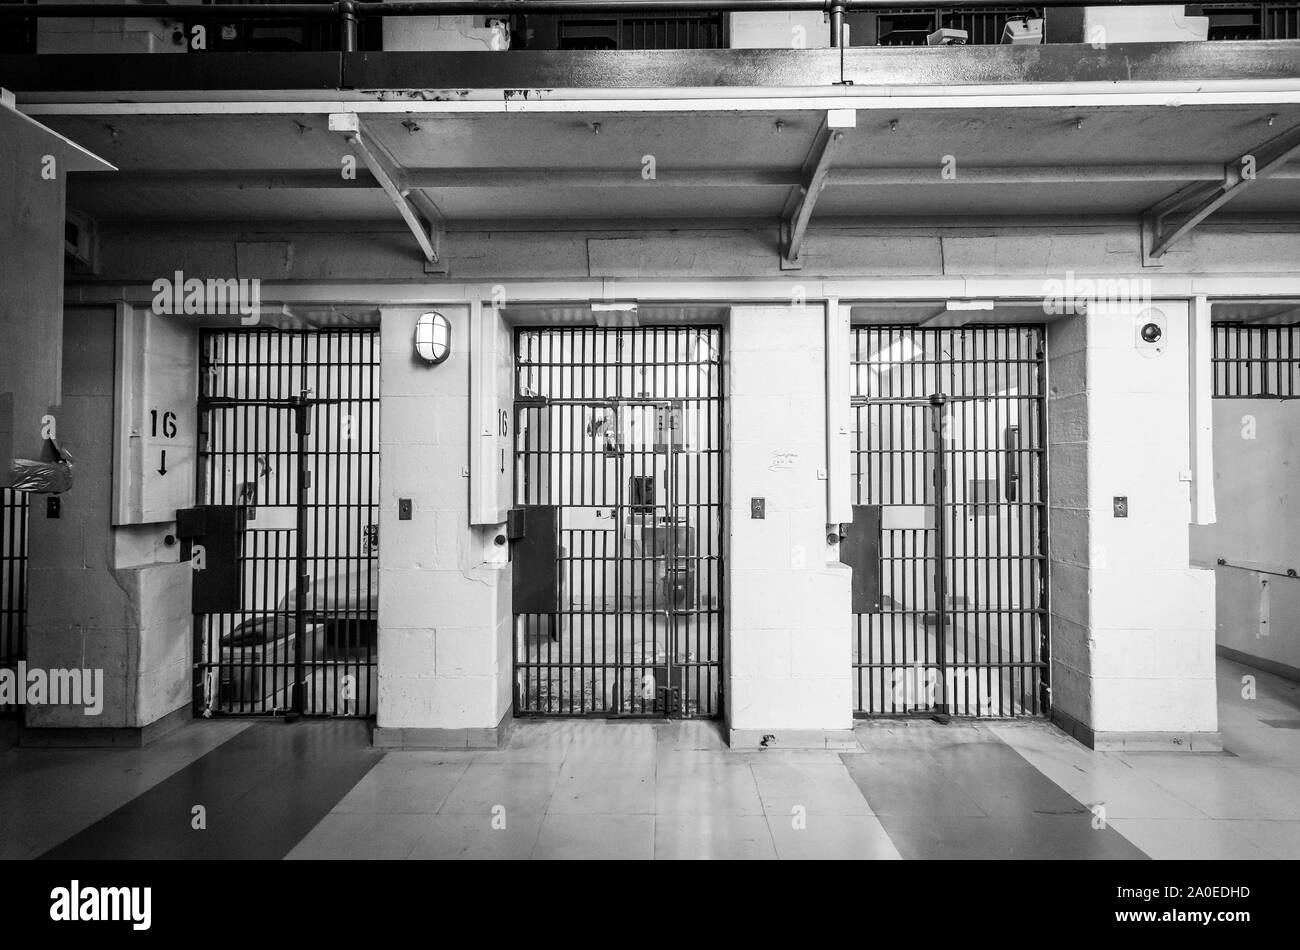 row of jail cell doors Kingston Penitentiary a former maximum security prison that opened June 1835 and closed September 2013 now open for Jailhouse T Stock Photo